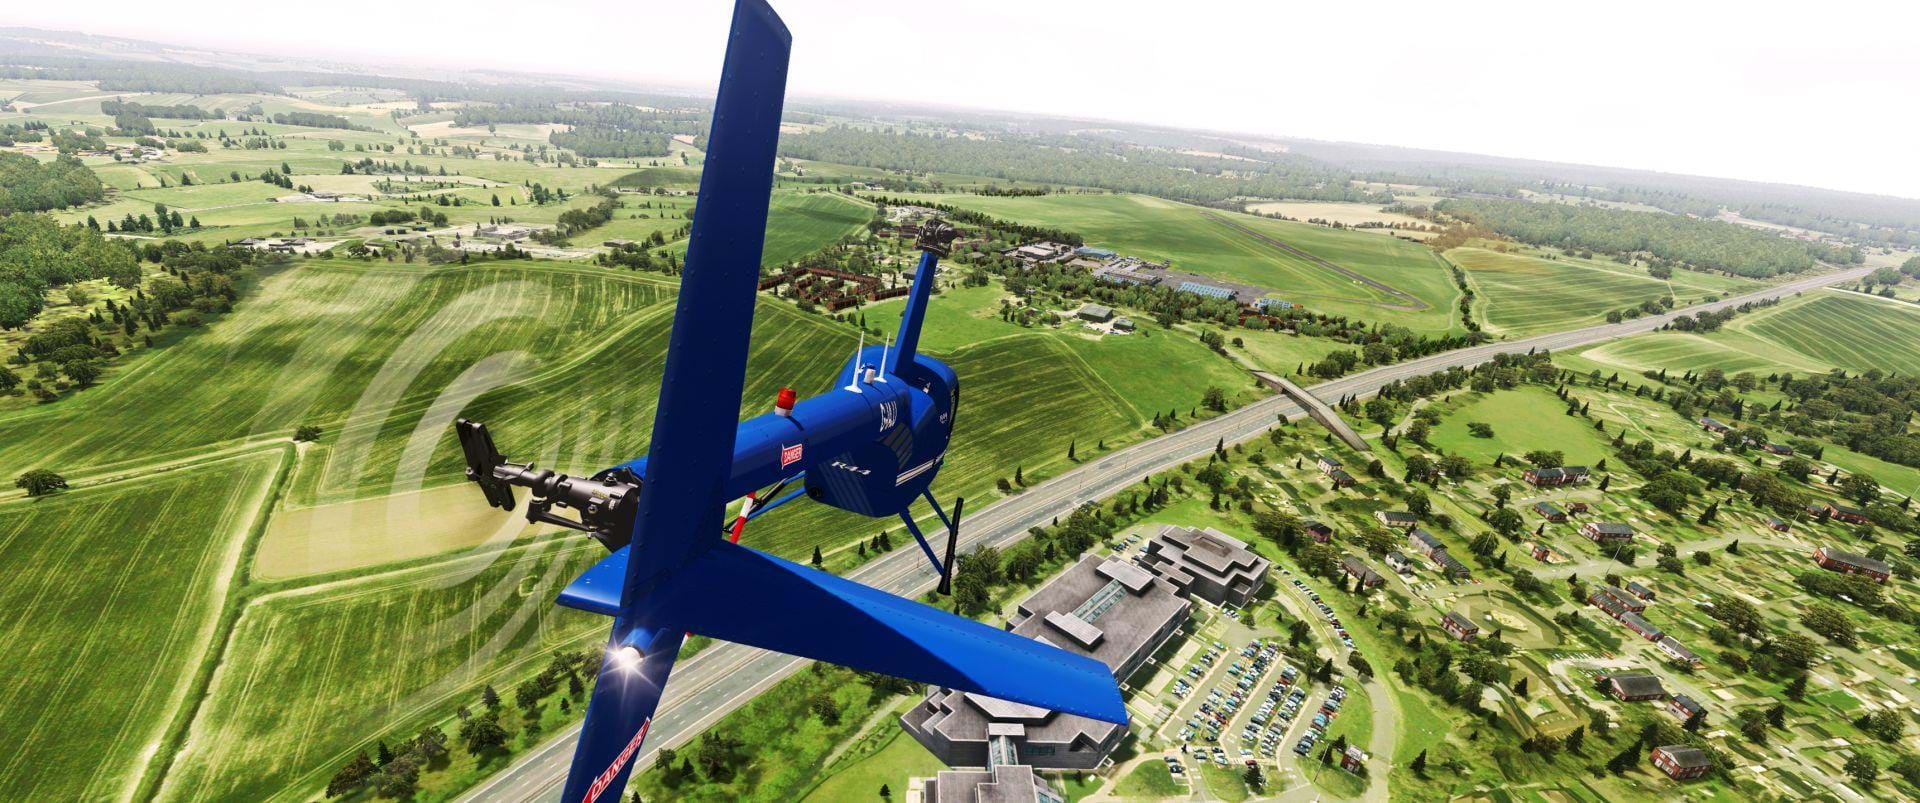 ORBX released Wycombe Air Park for P3D